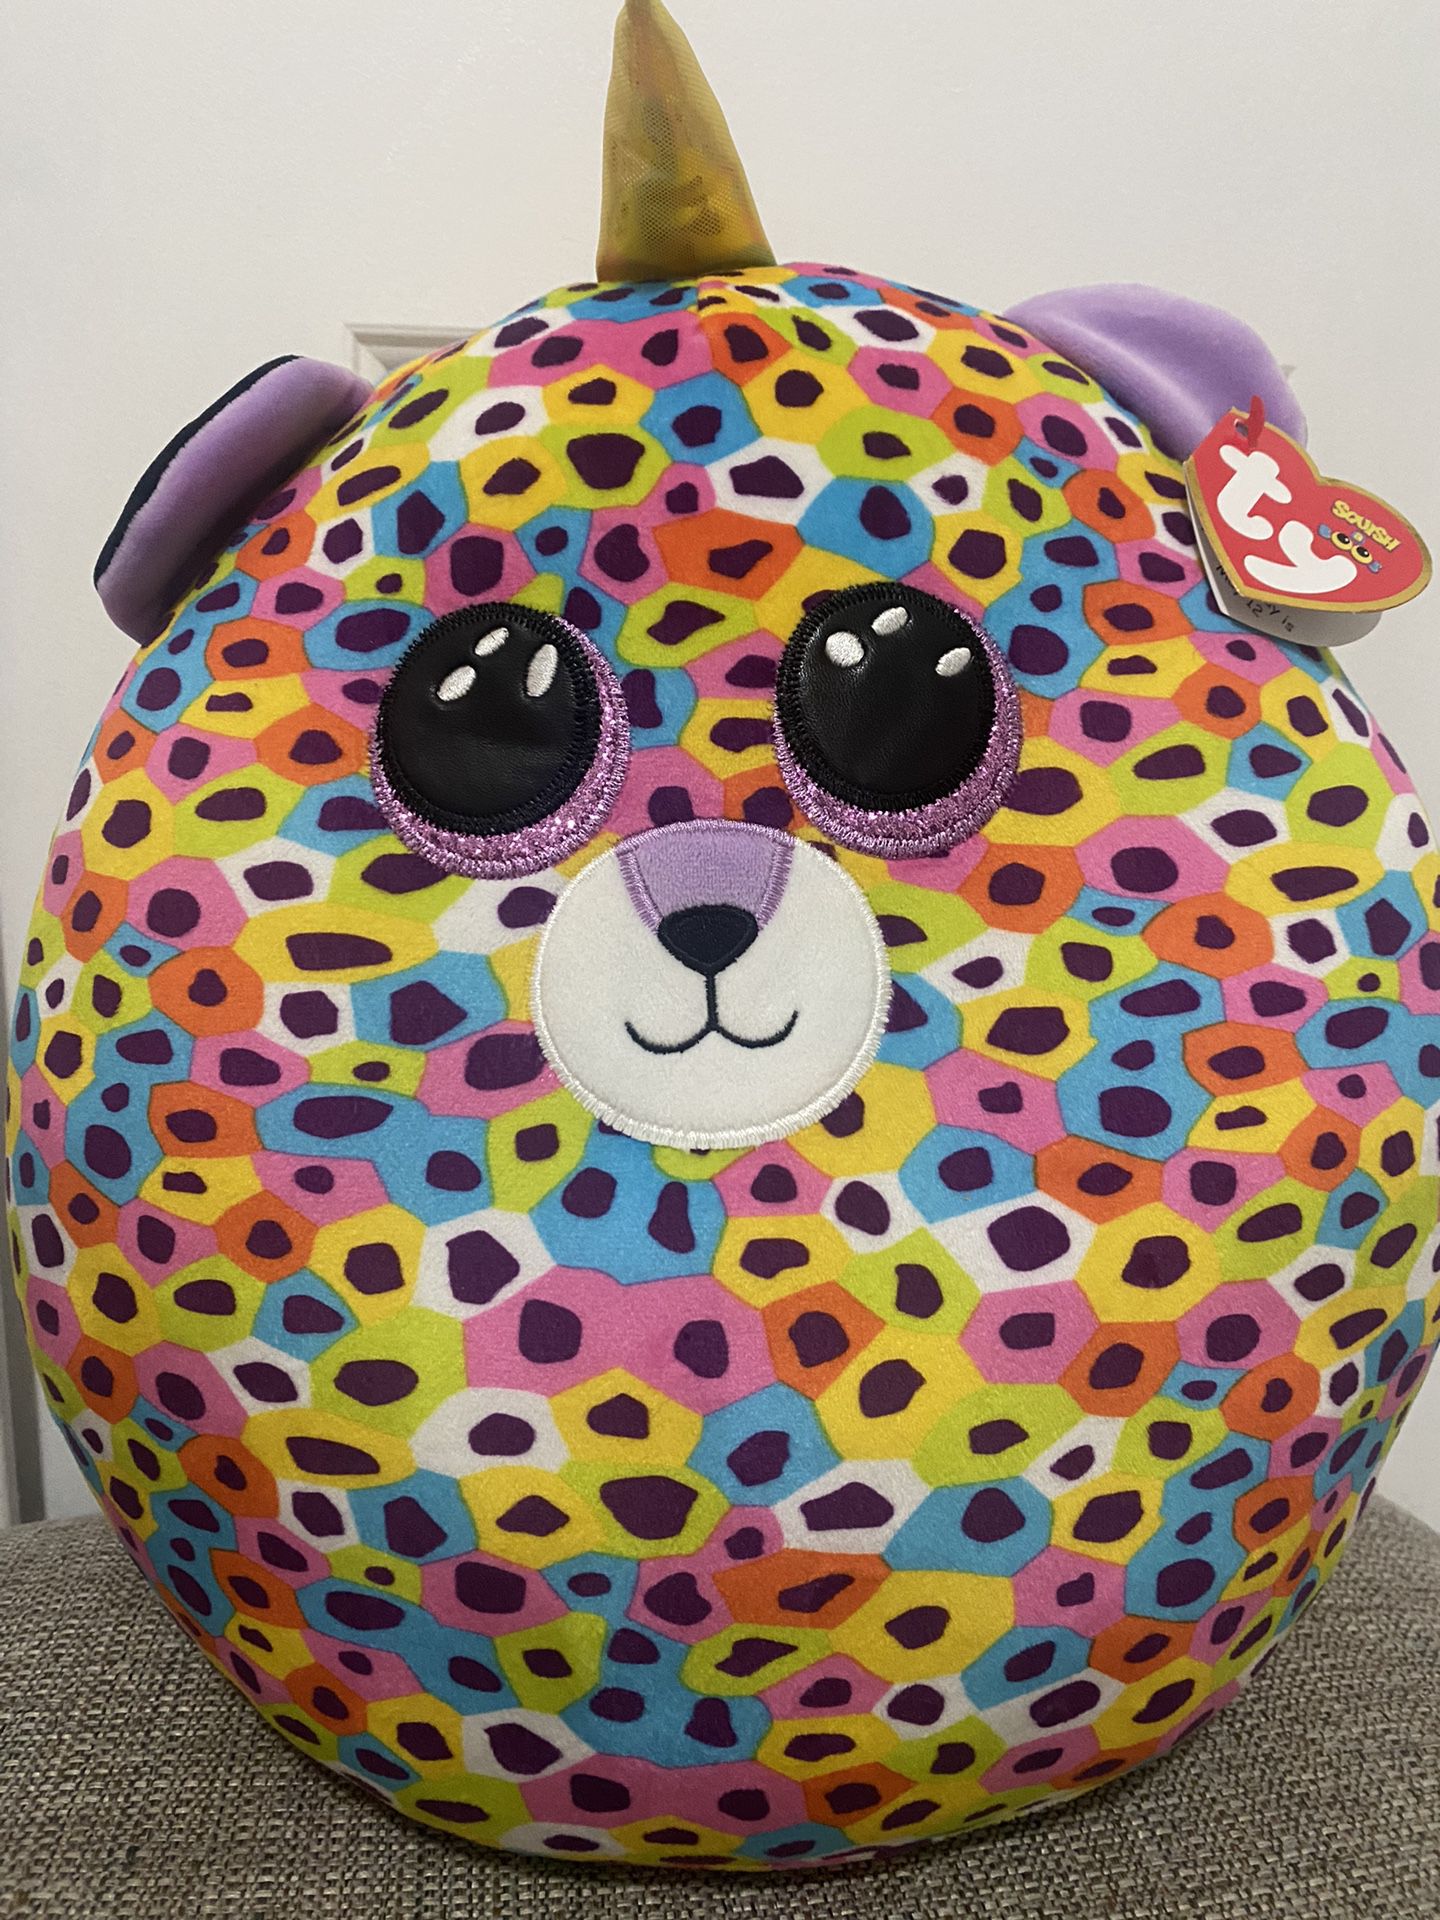 Ty Squish-A-Boos Giselle The Multicolor Leopard